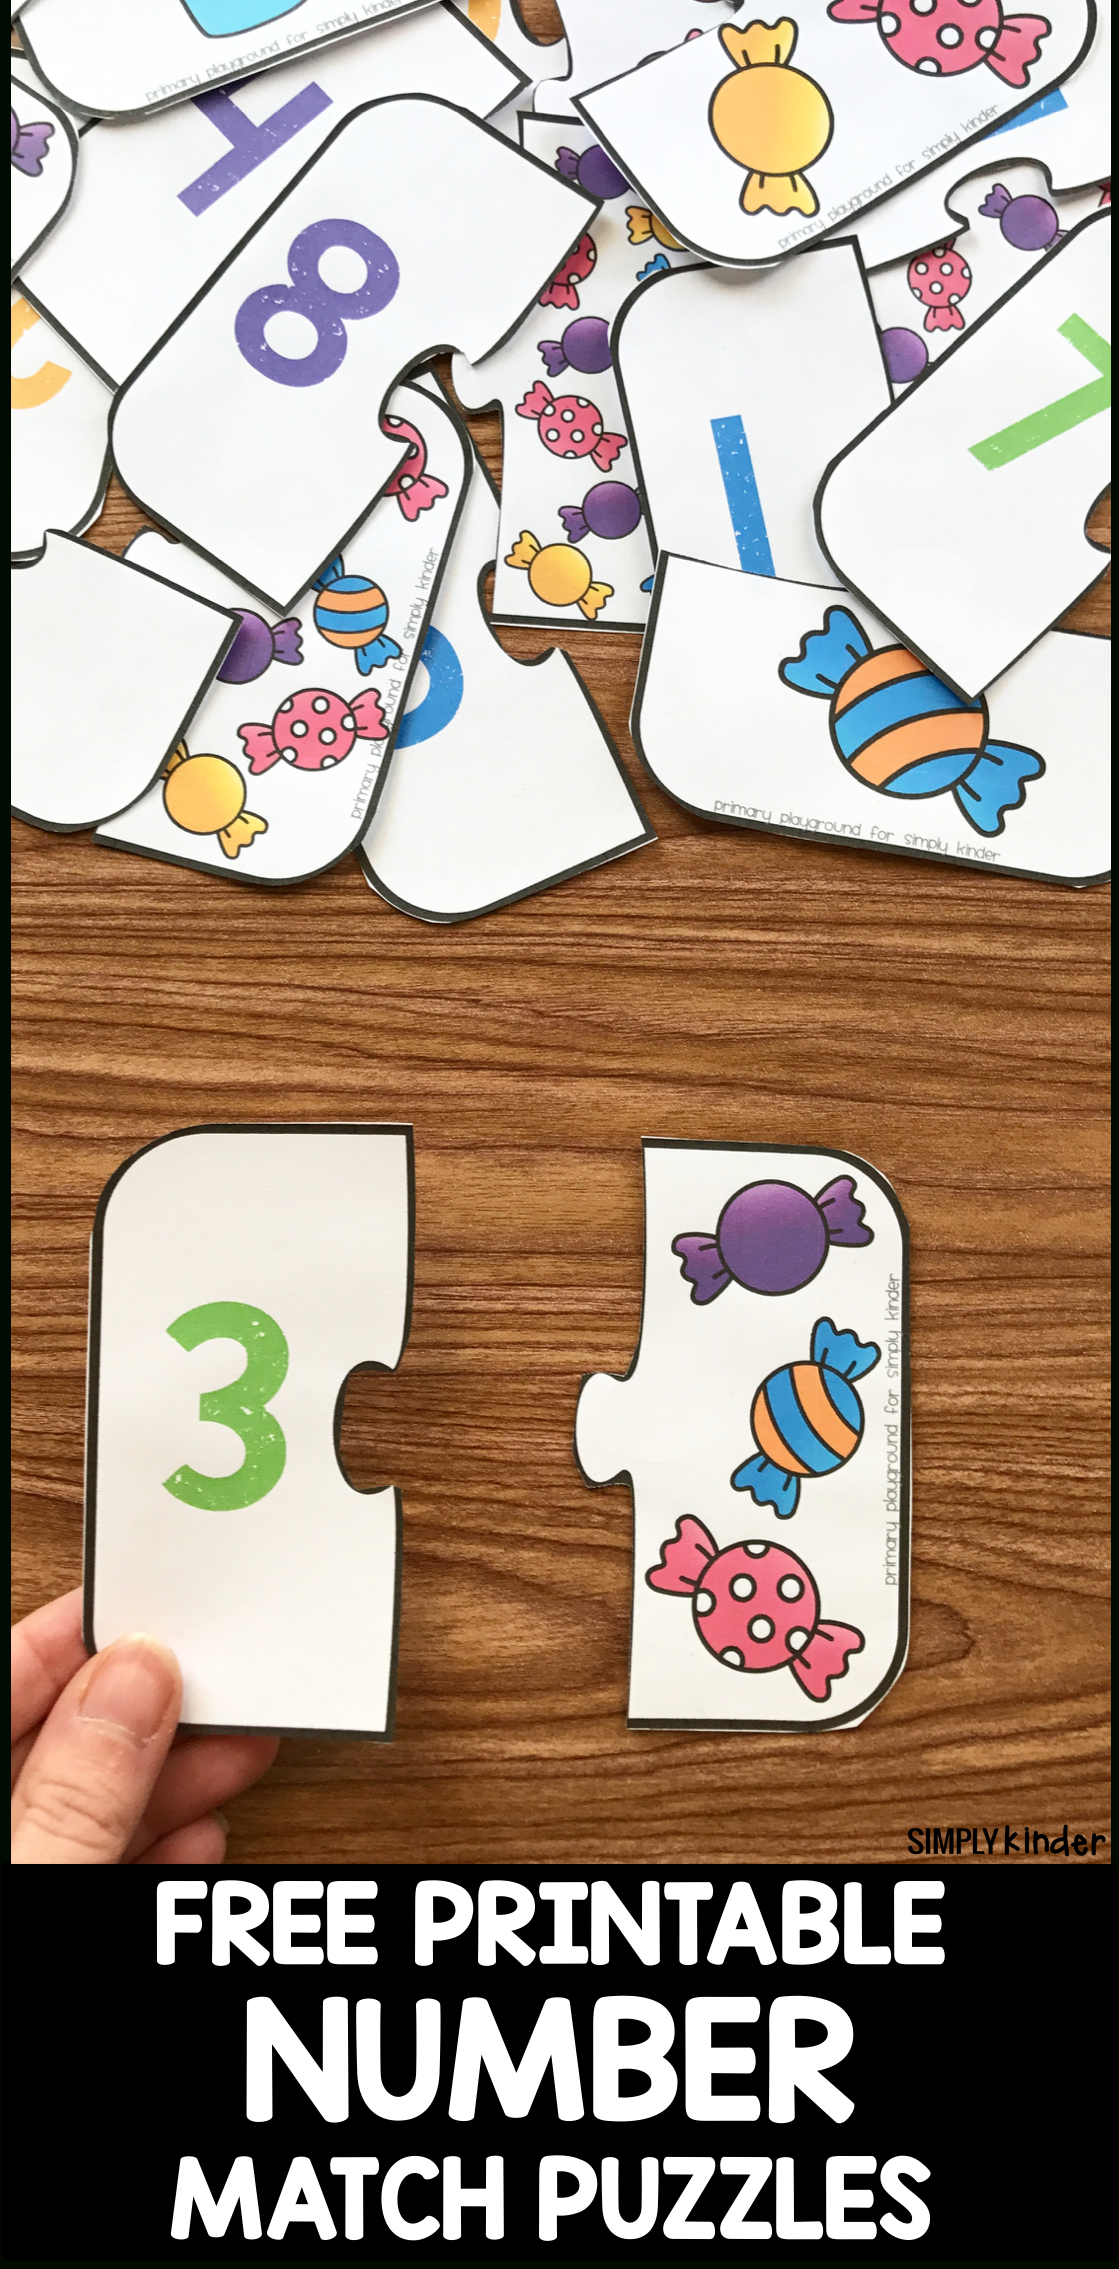 Free Printable Number Match Puzzles - Simply Kinder - Printable Puzzles For Toddlers